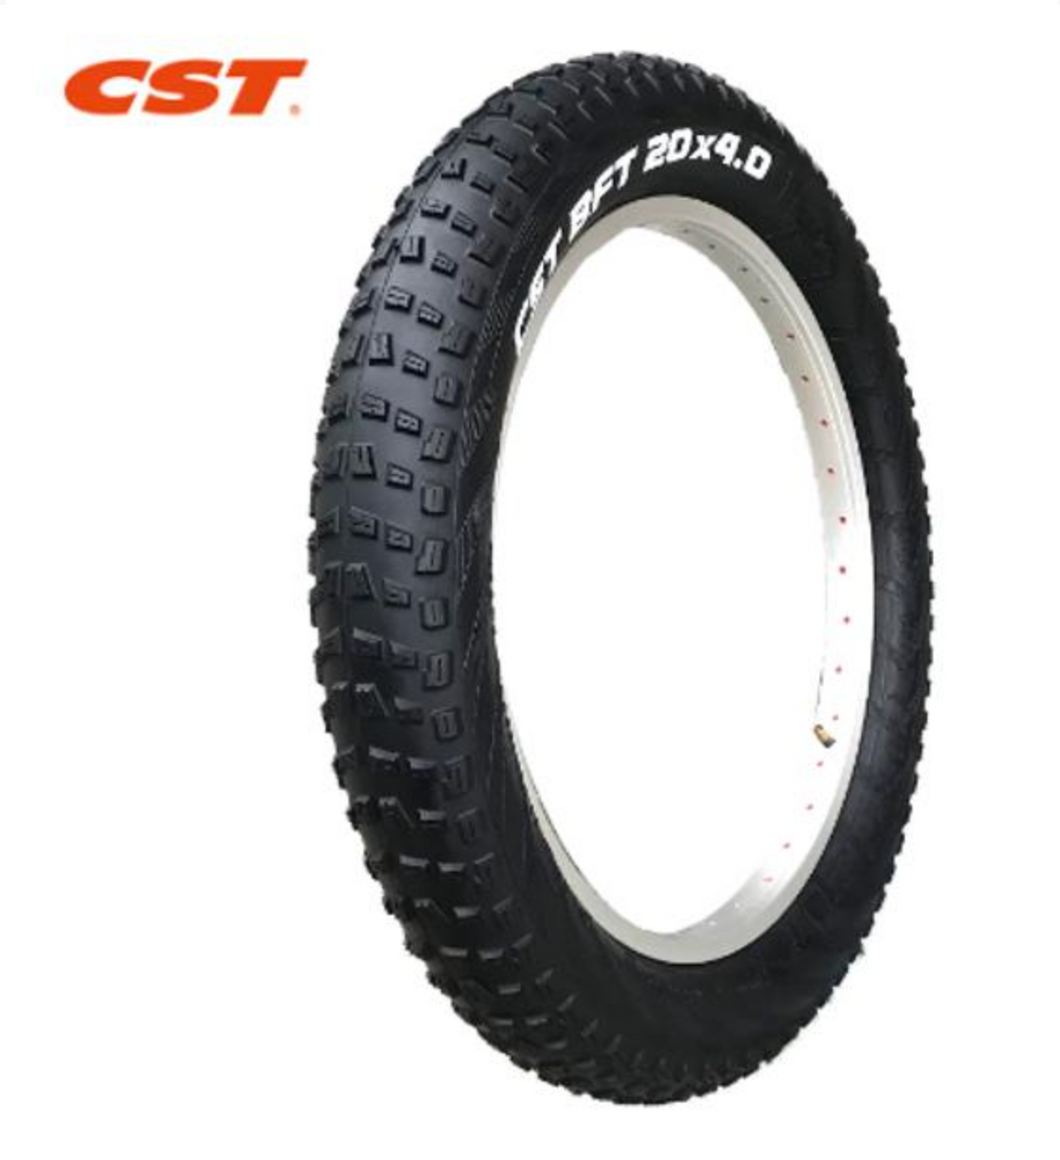 CST - Fat Tyre C1752 - 20 x 4.0 - BFT - Wirebead